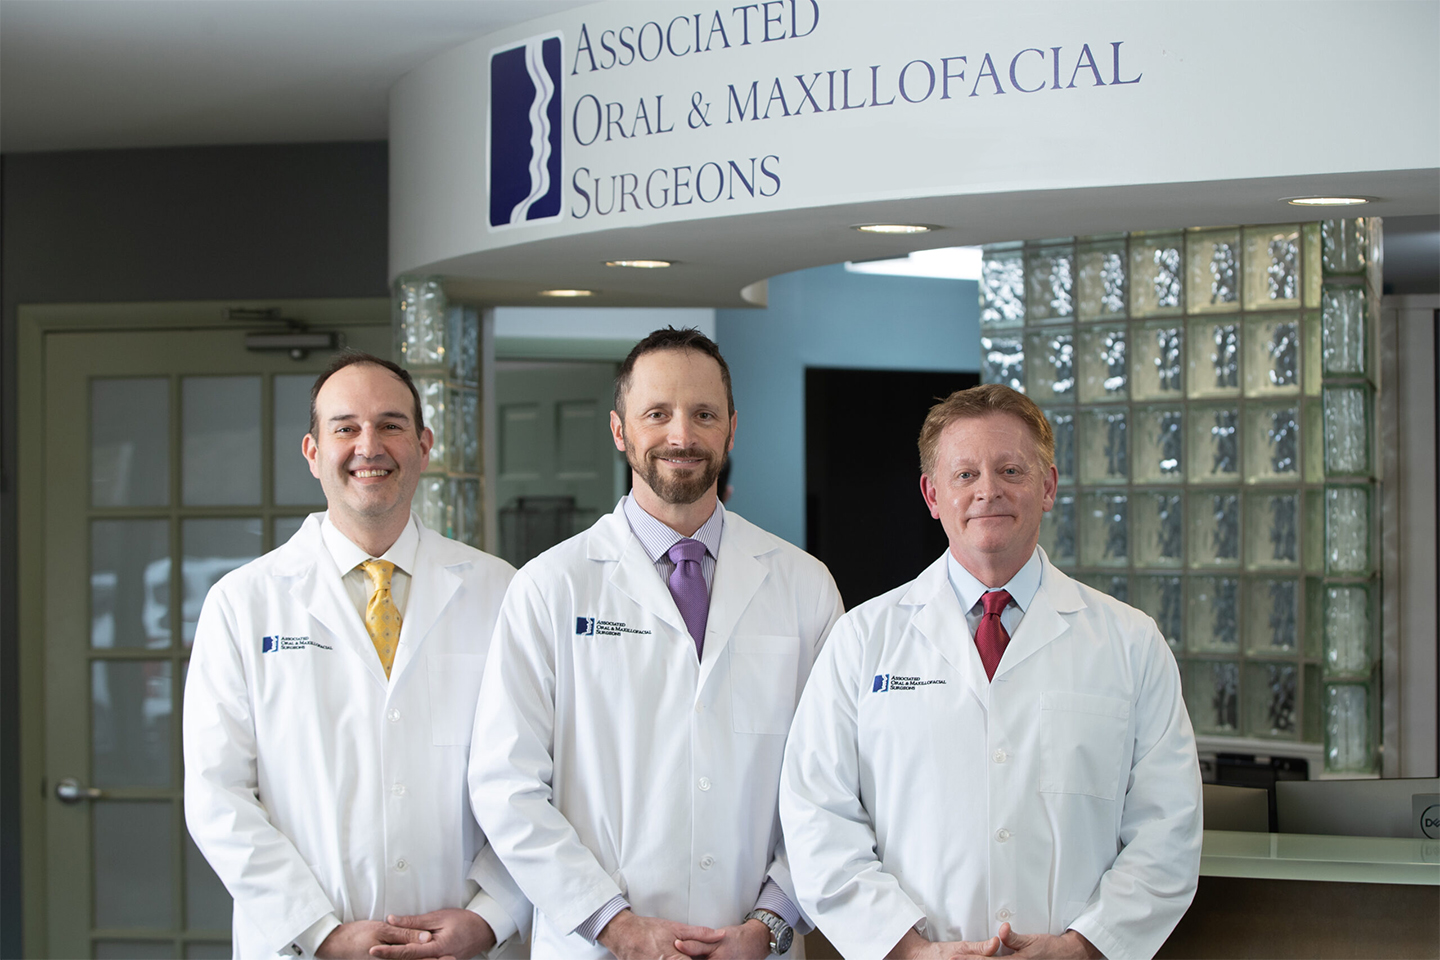 Dr Busch, Dr Otte and Dr Schroeder, oral surgeons at Associated Oral and Maxillofacial Surgeons